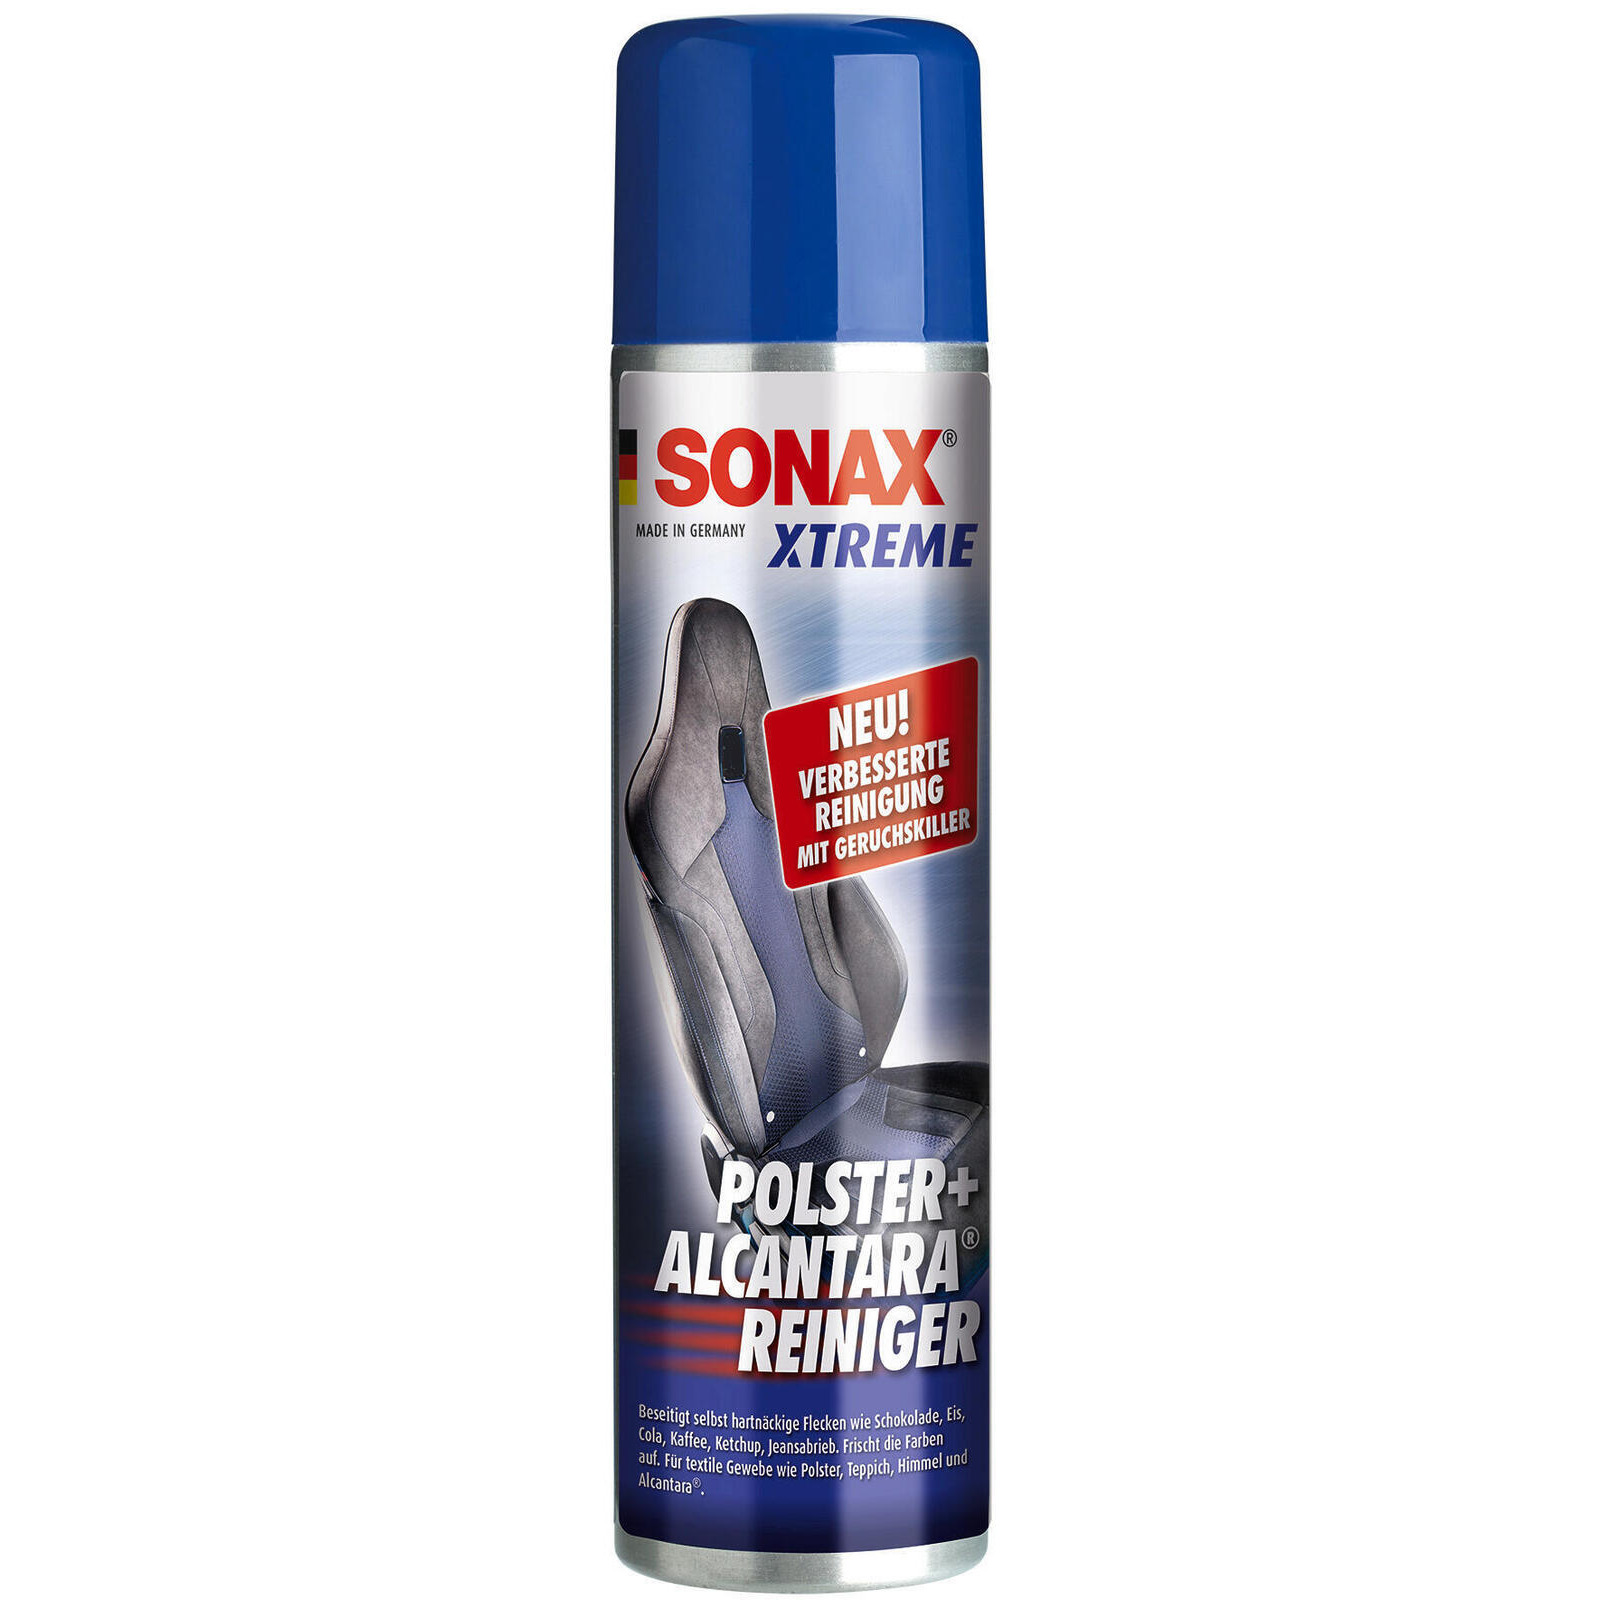 SONAX Textile / Carpet Cleaner Xtreme Upholstery & Alcantara cleaner